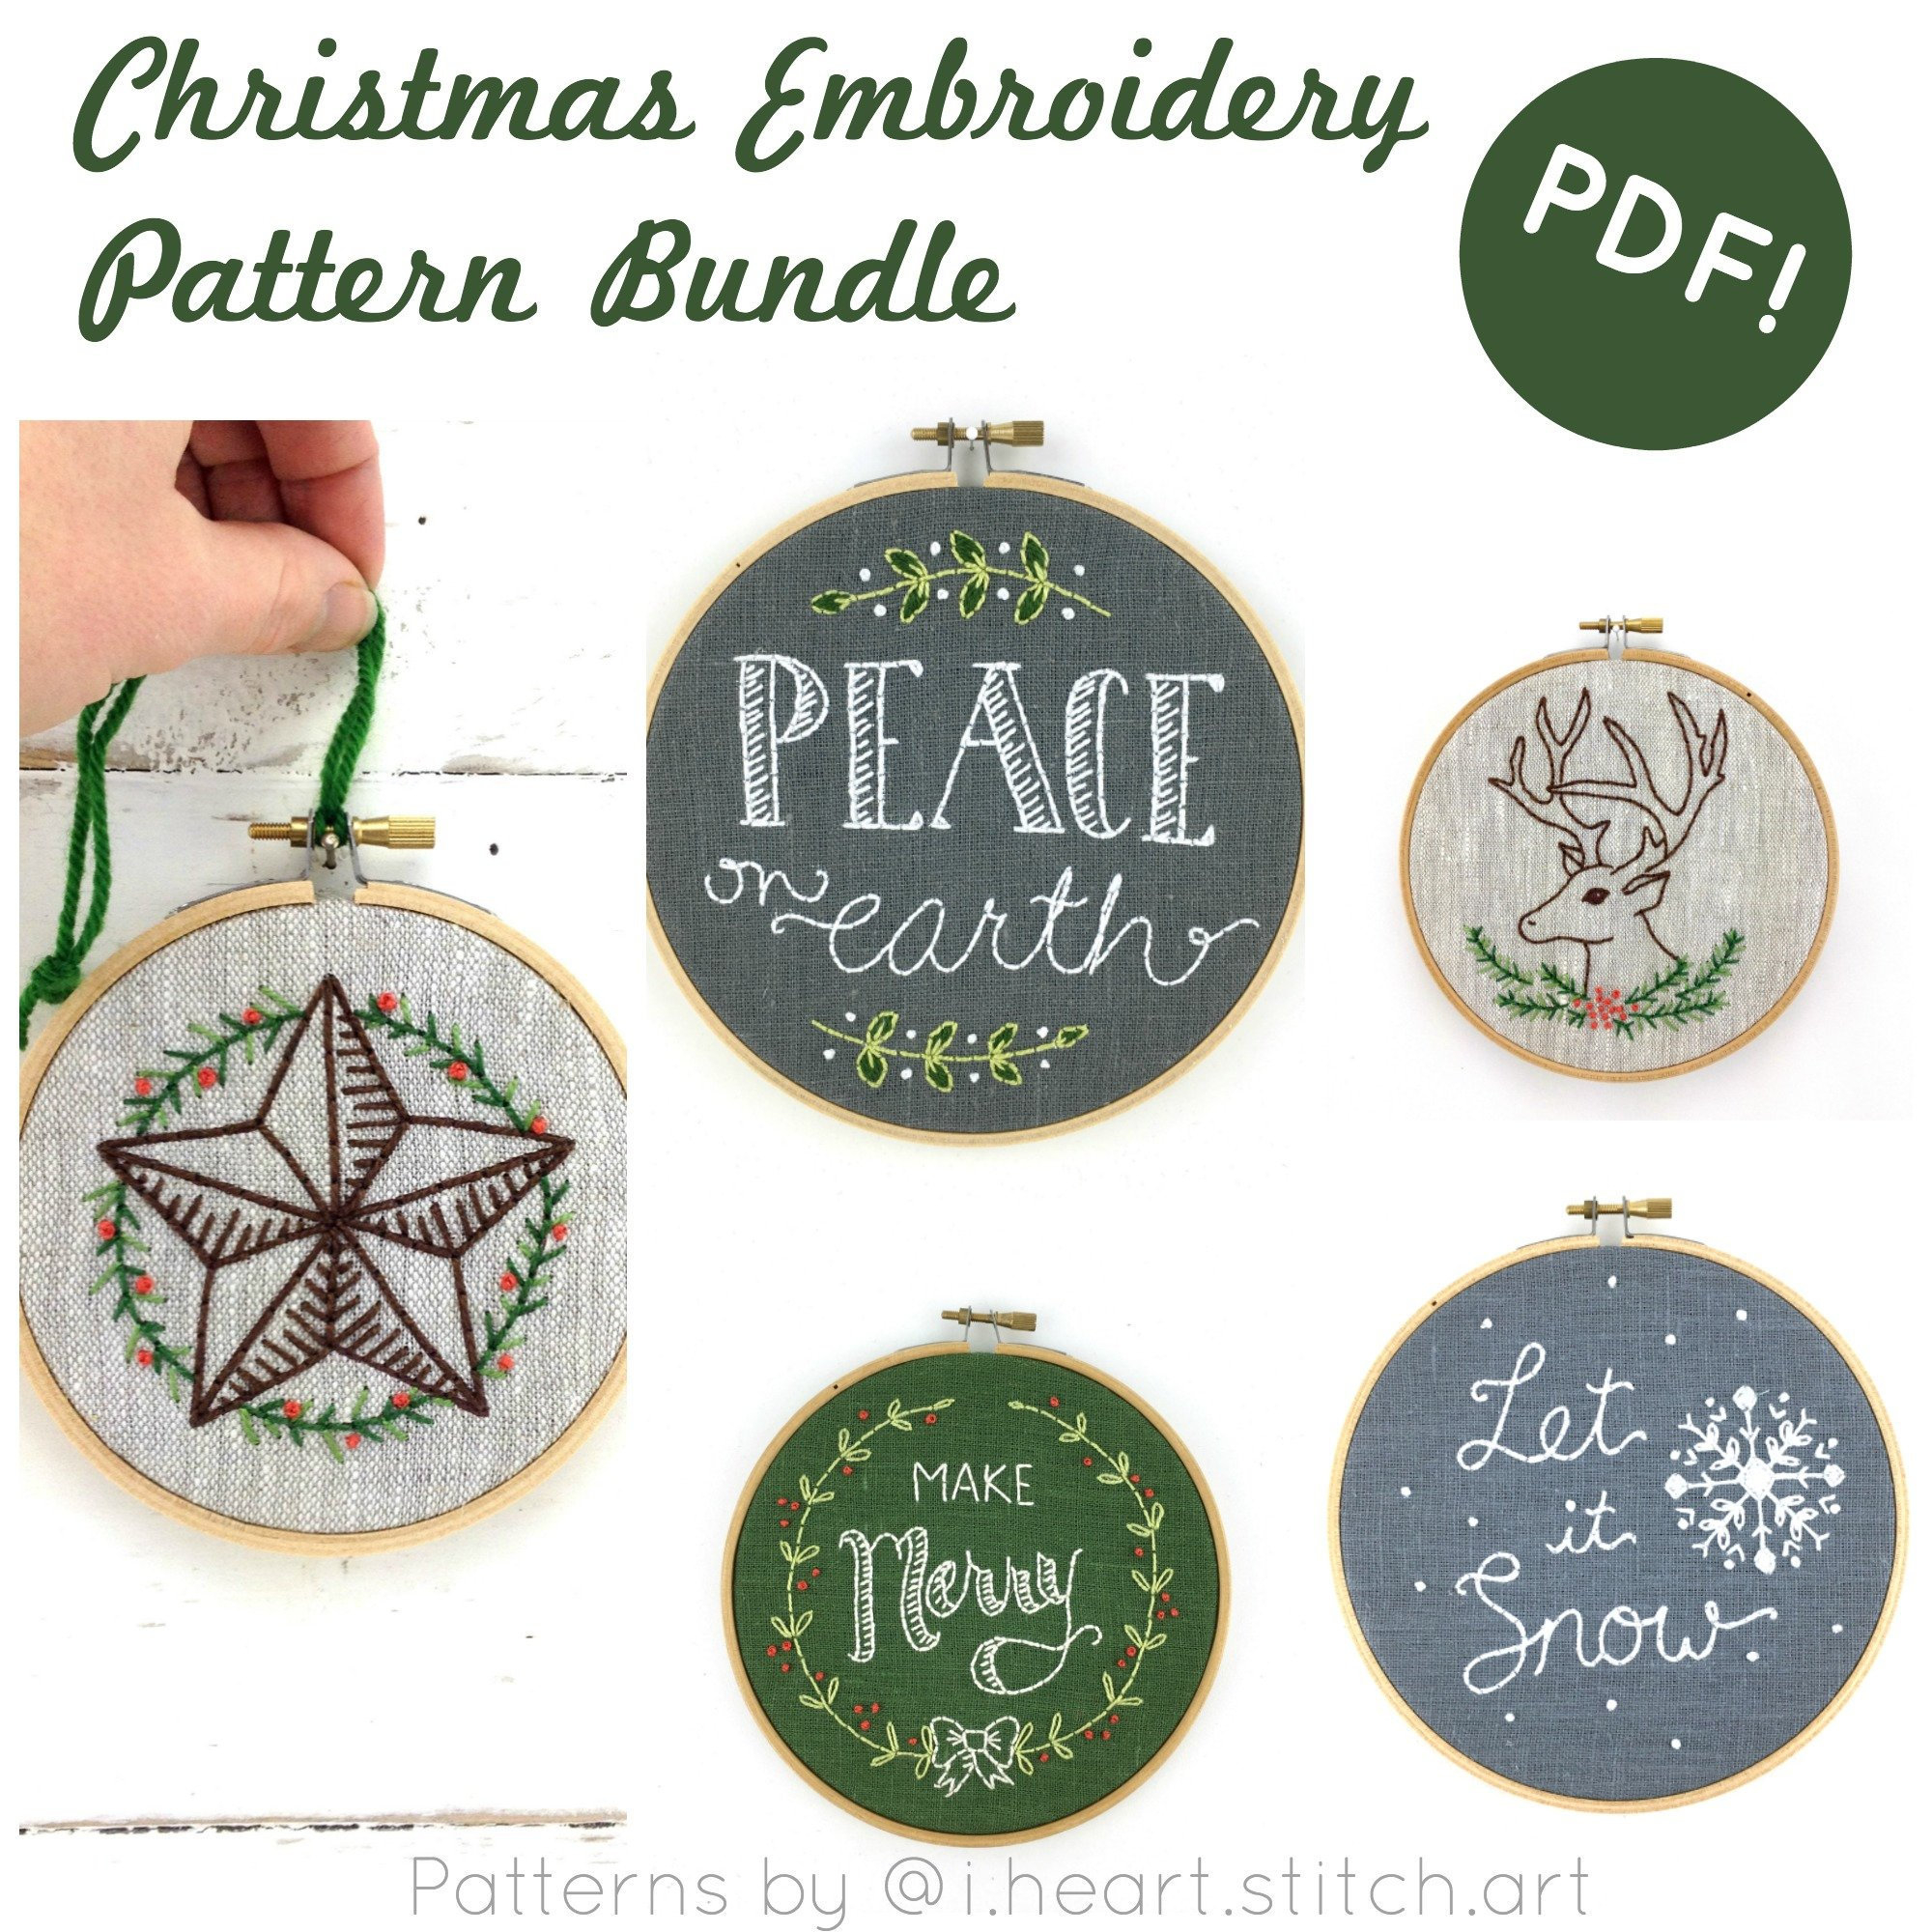 Embroidery Christmas Patterns Christmas Embroidery Pattern Set Digital Download